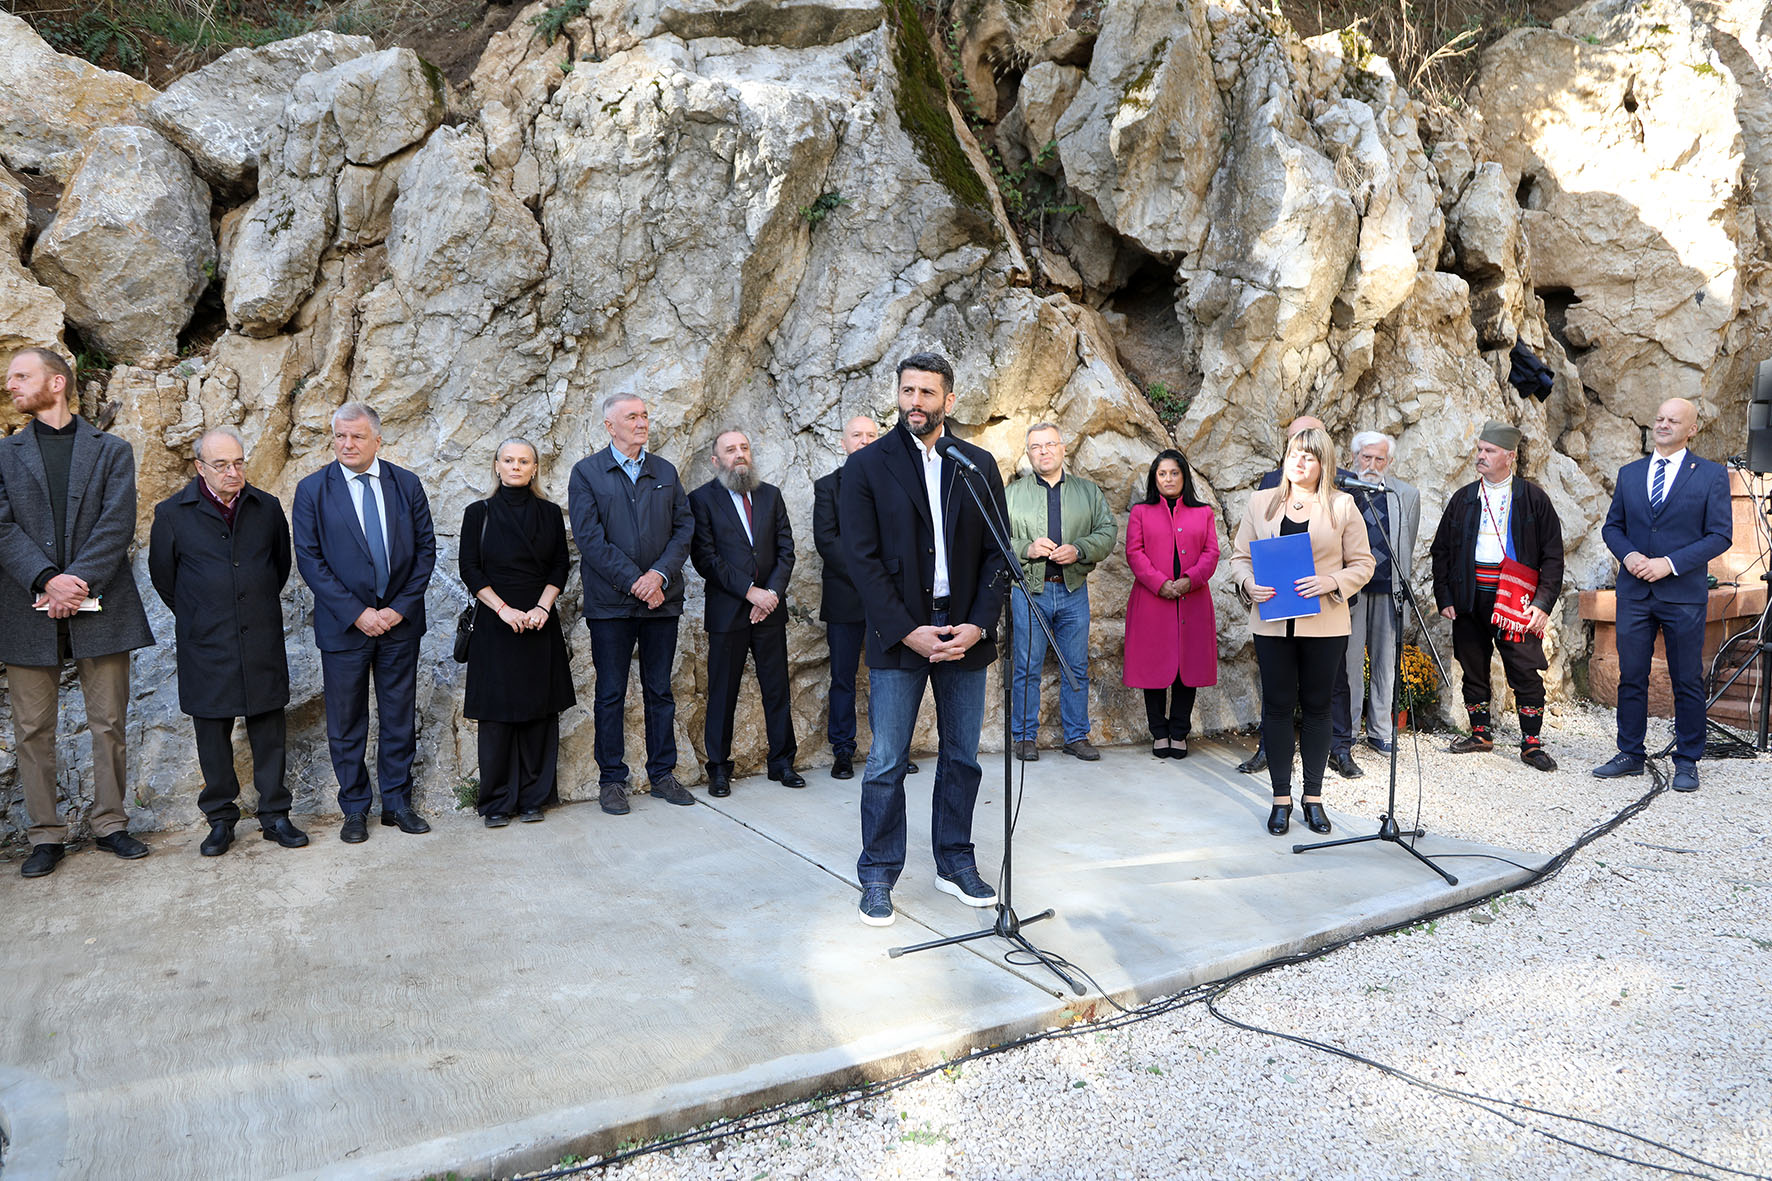 UNVEILING OF THE MONUMENT TO VICTIMS OF COMMUNIST TERROR IN BELGRADE